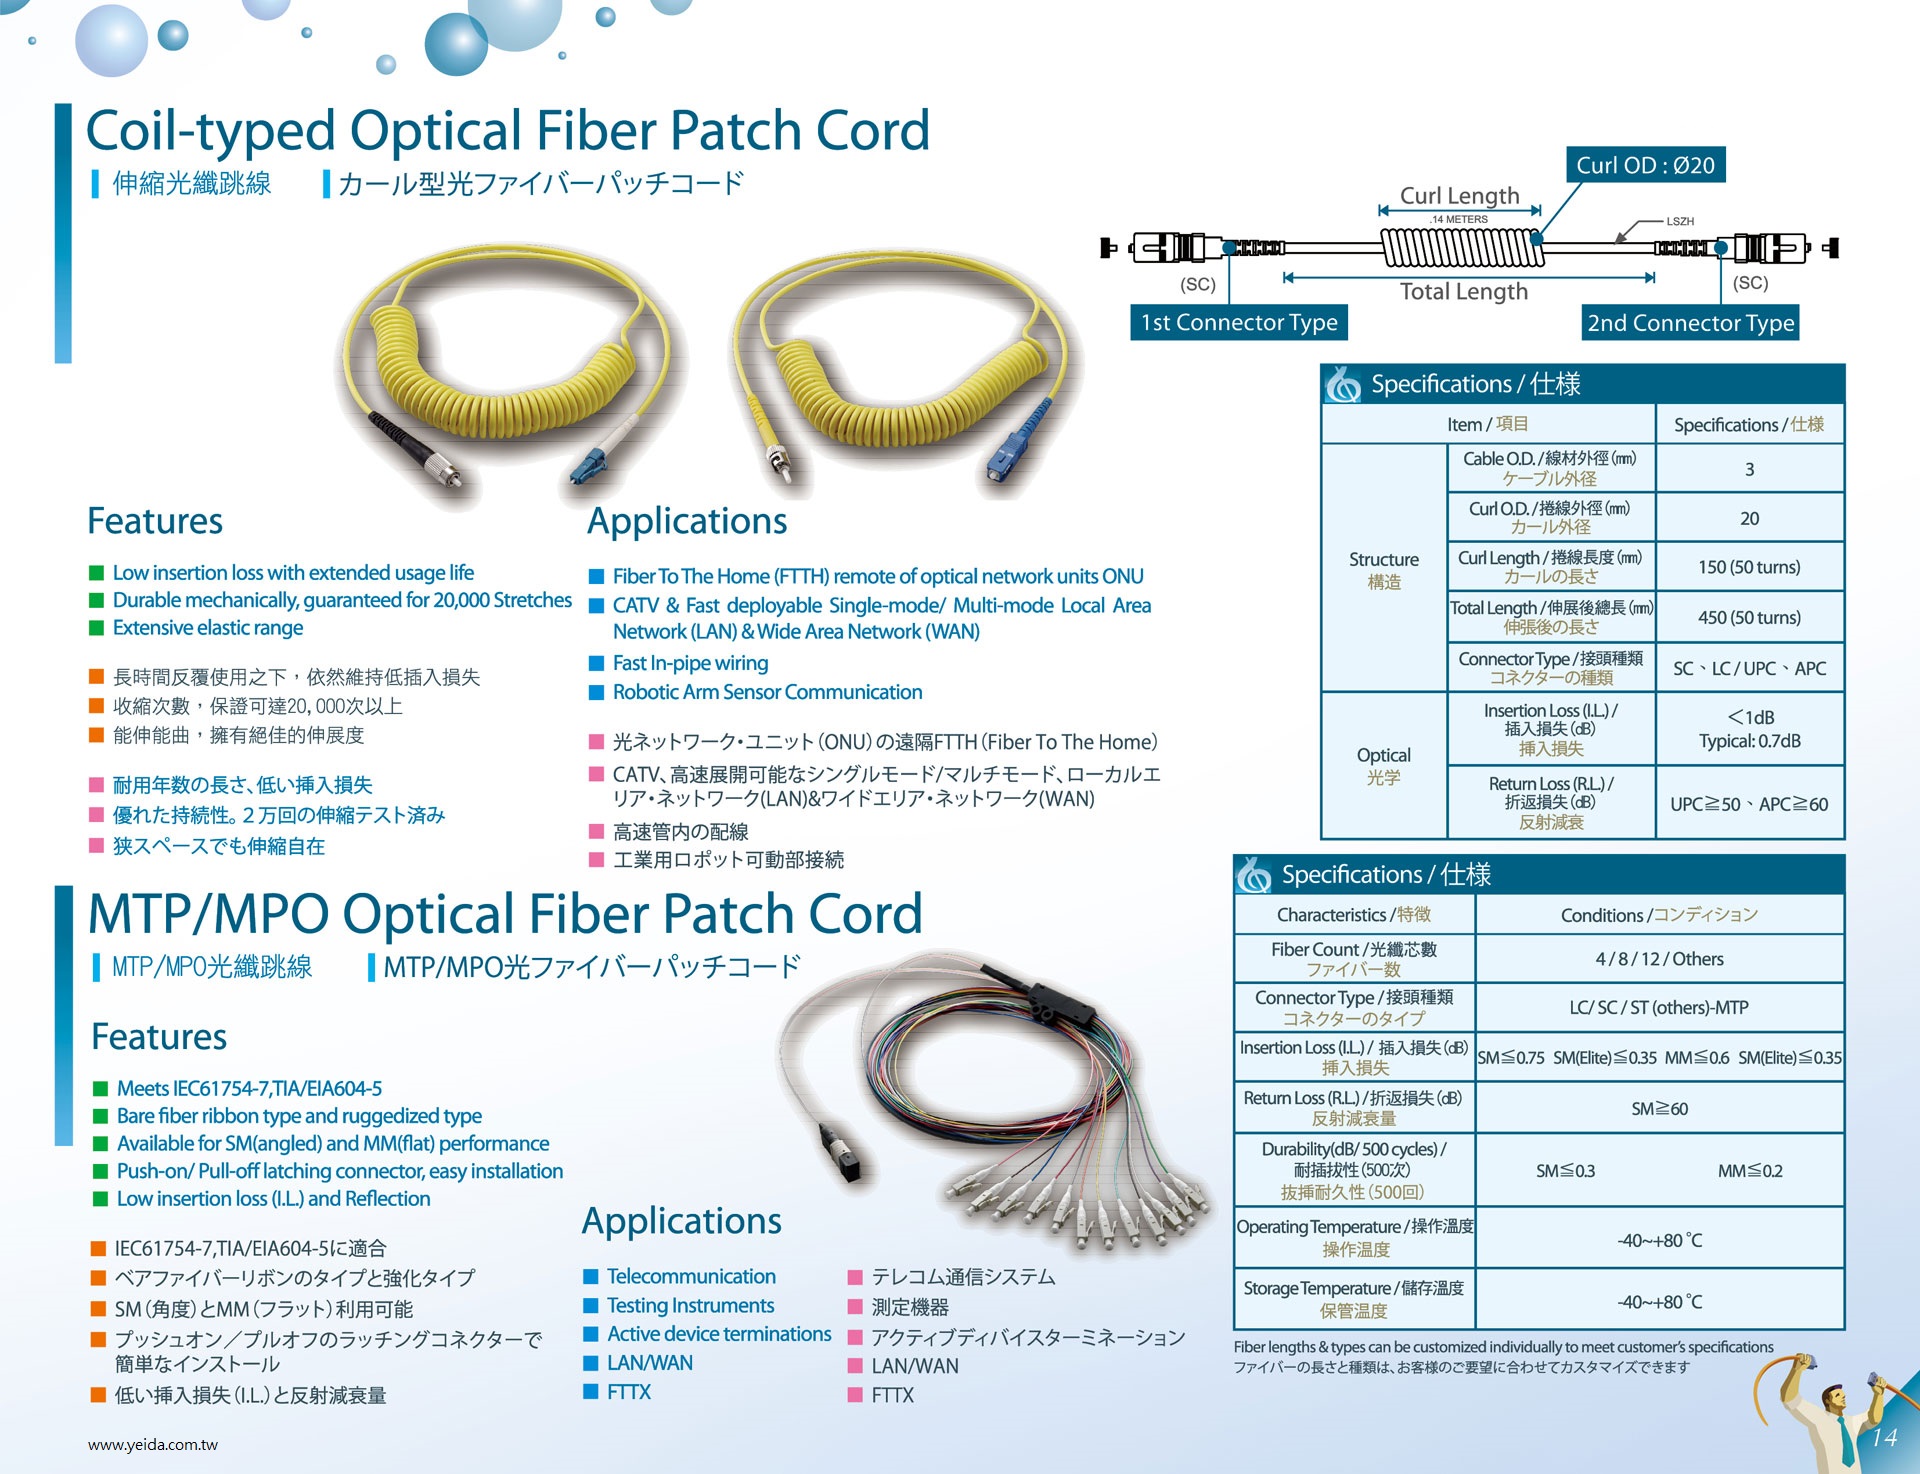 NEX1 Special Patch Cords 特殊光ファイバー / 伸縮光纖跳線Coil-typed; MTP/MPO Optical Fiber Patch Cords